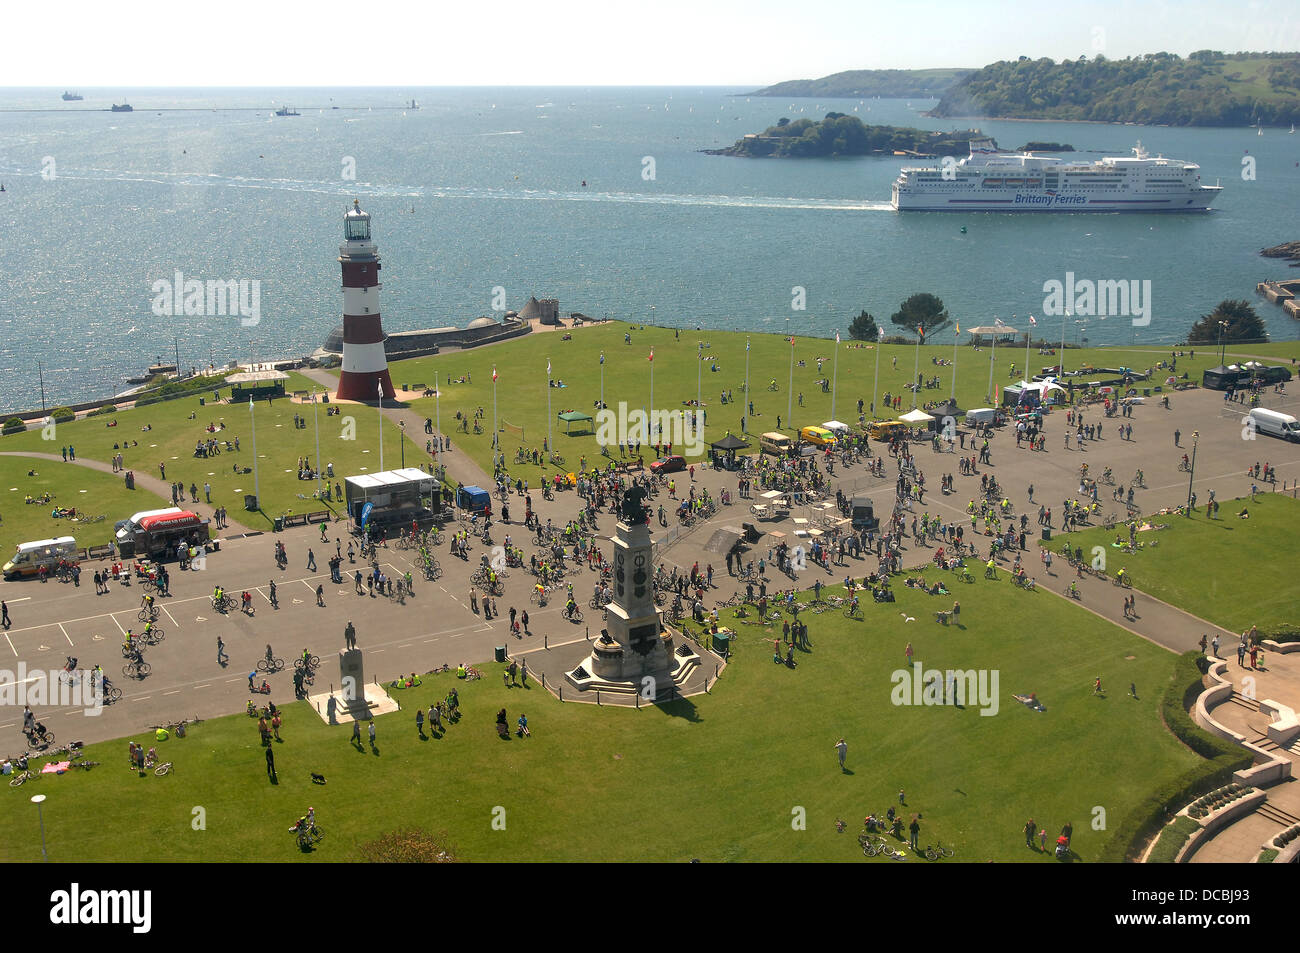 A ferry comes into Plymouth as people enjoy themselves on Plymouth Hoe. Stock Photo